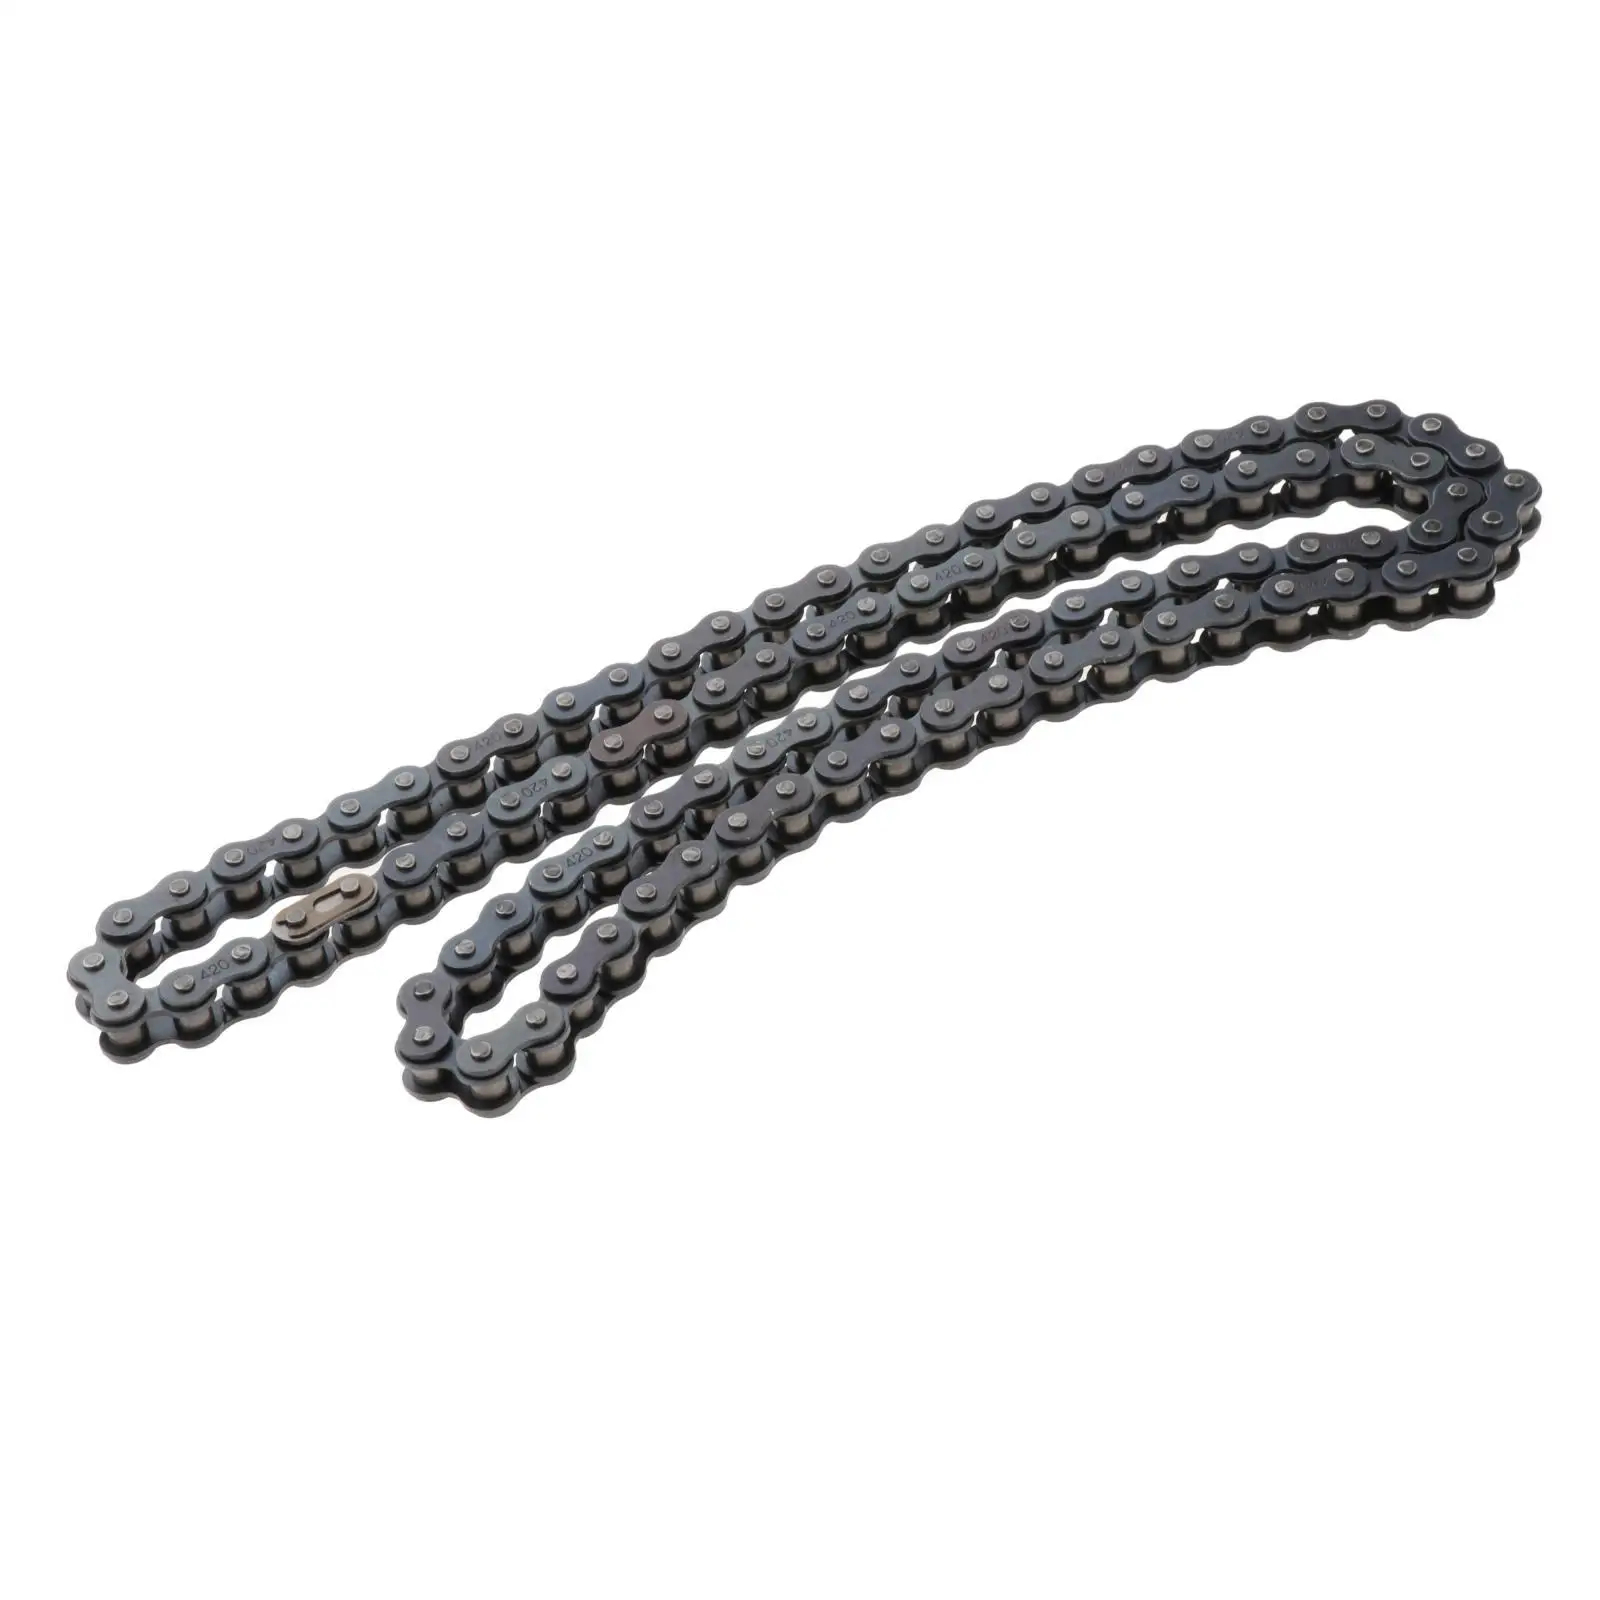 420 Motorcycle Chain 50-110Cc Accessories Replacement 96L 102L 104L 106L Motorcycle Chain Fit for Go Kart ATV Quad Scooter Bike